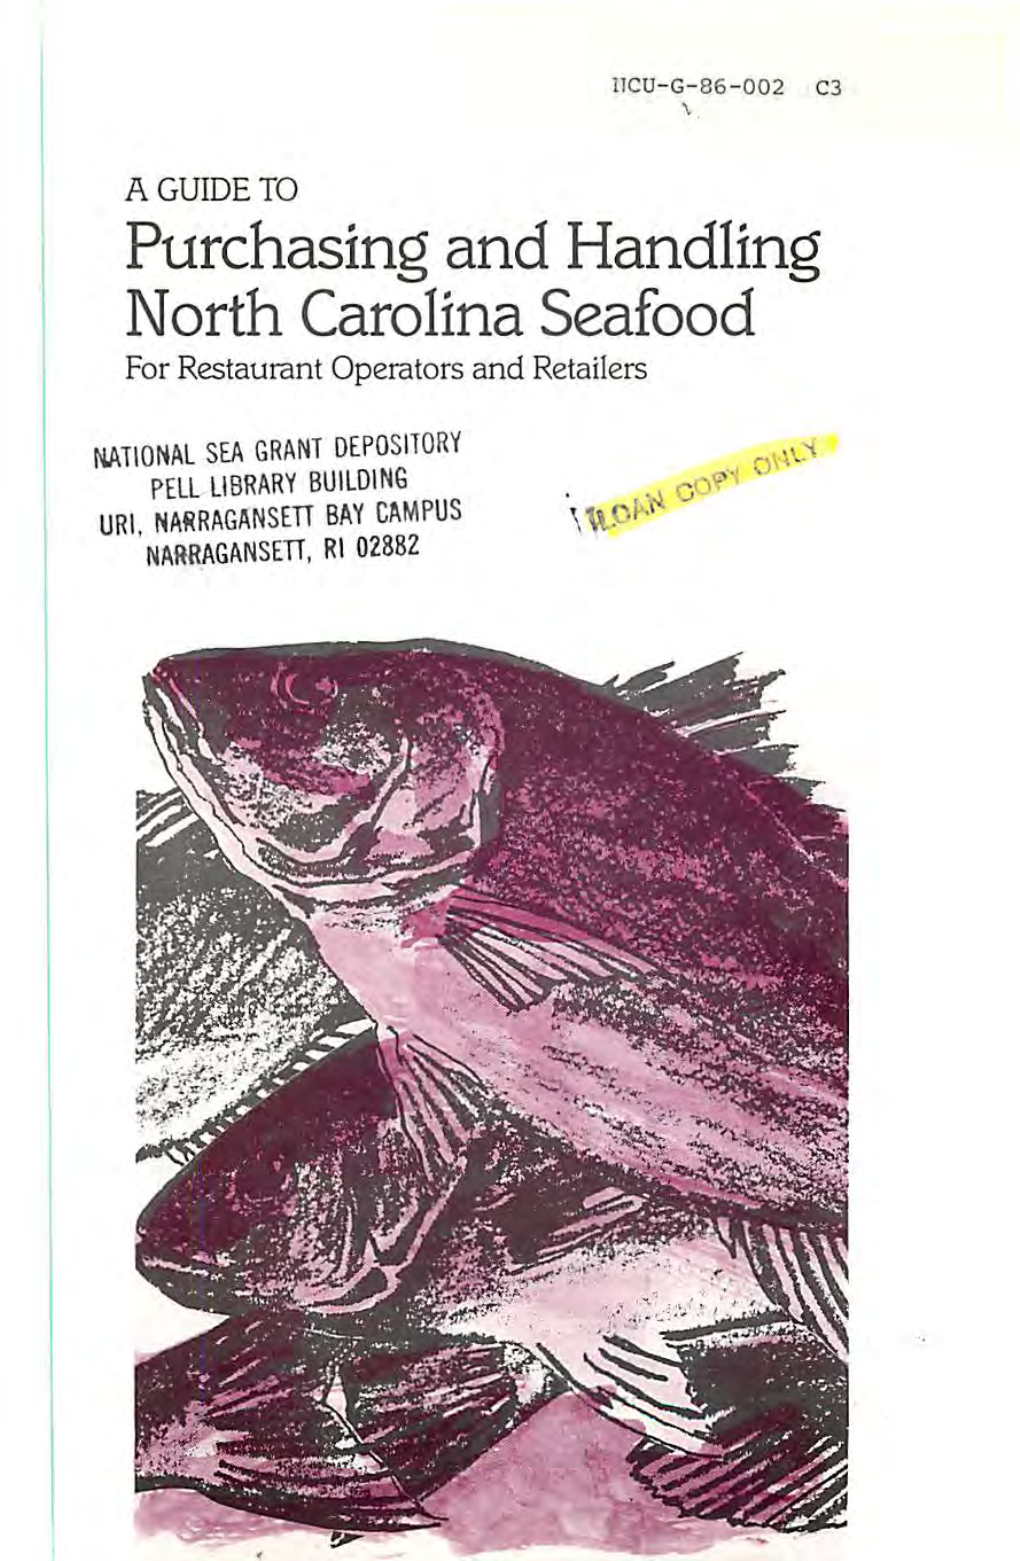 Purchasing and Handling North Carolina Seafood for Restaurant Operators and Retailers